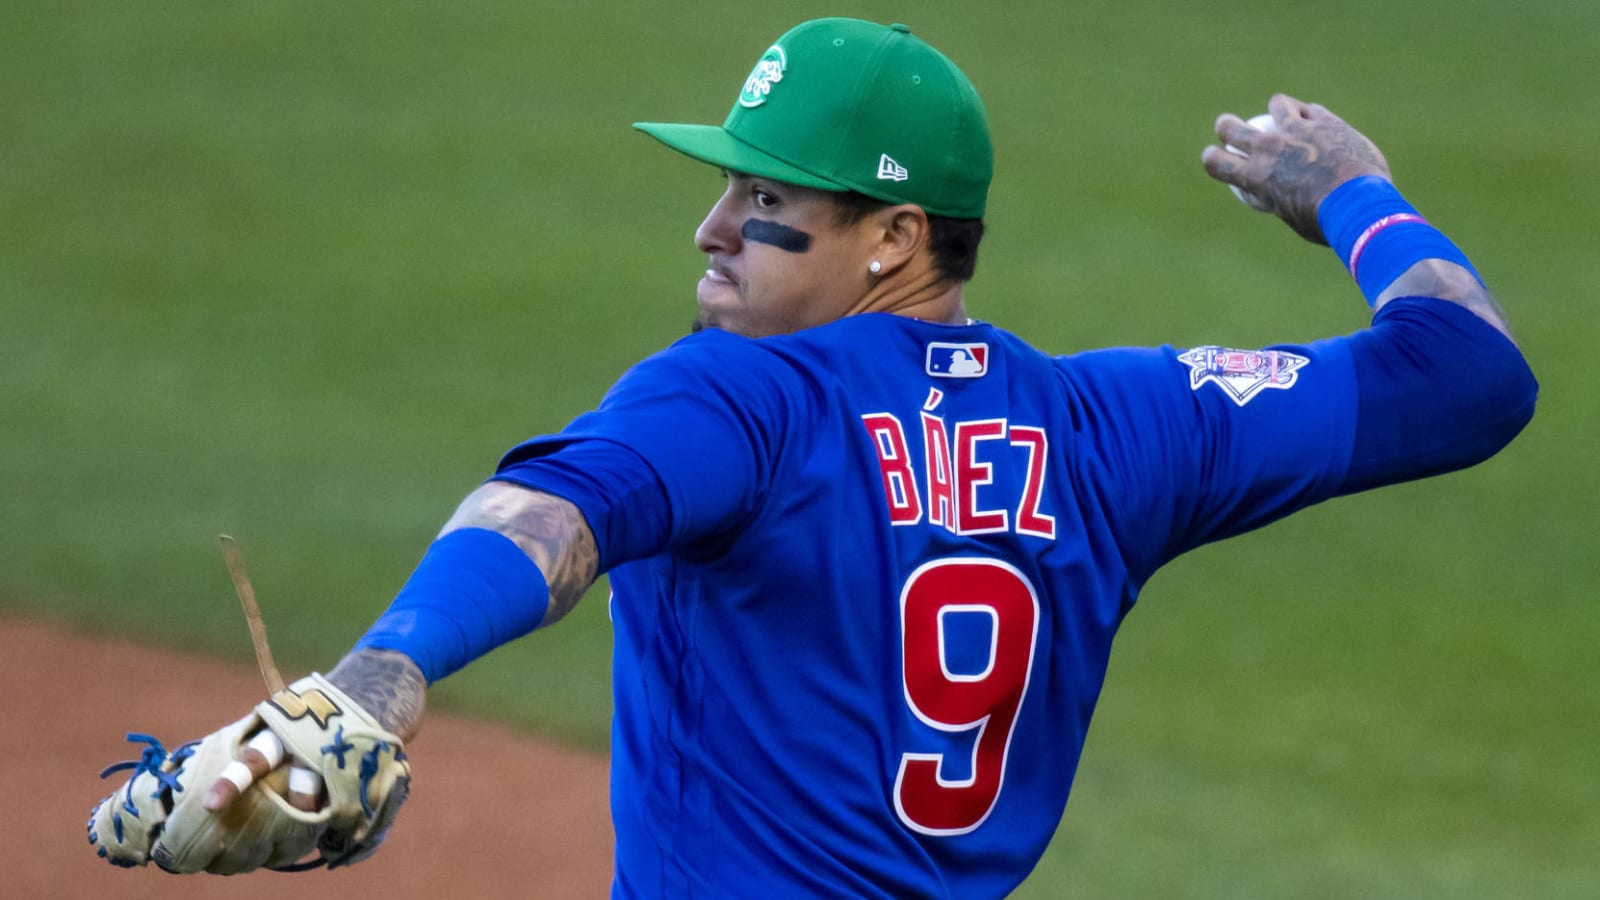 Cubs offered Baez extension around $180M after '19?